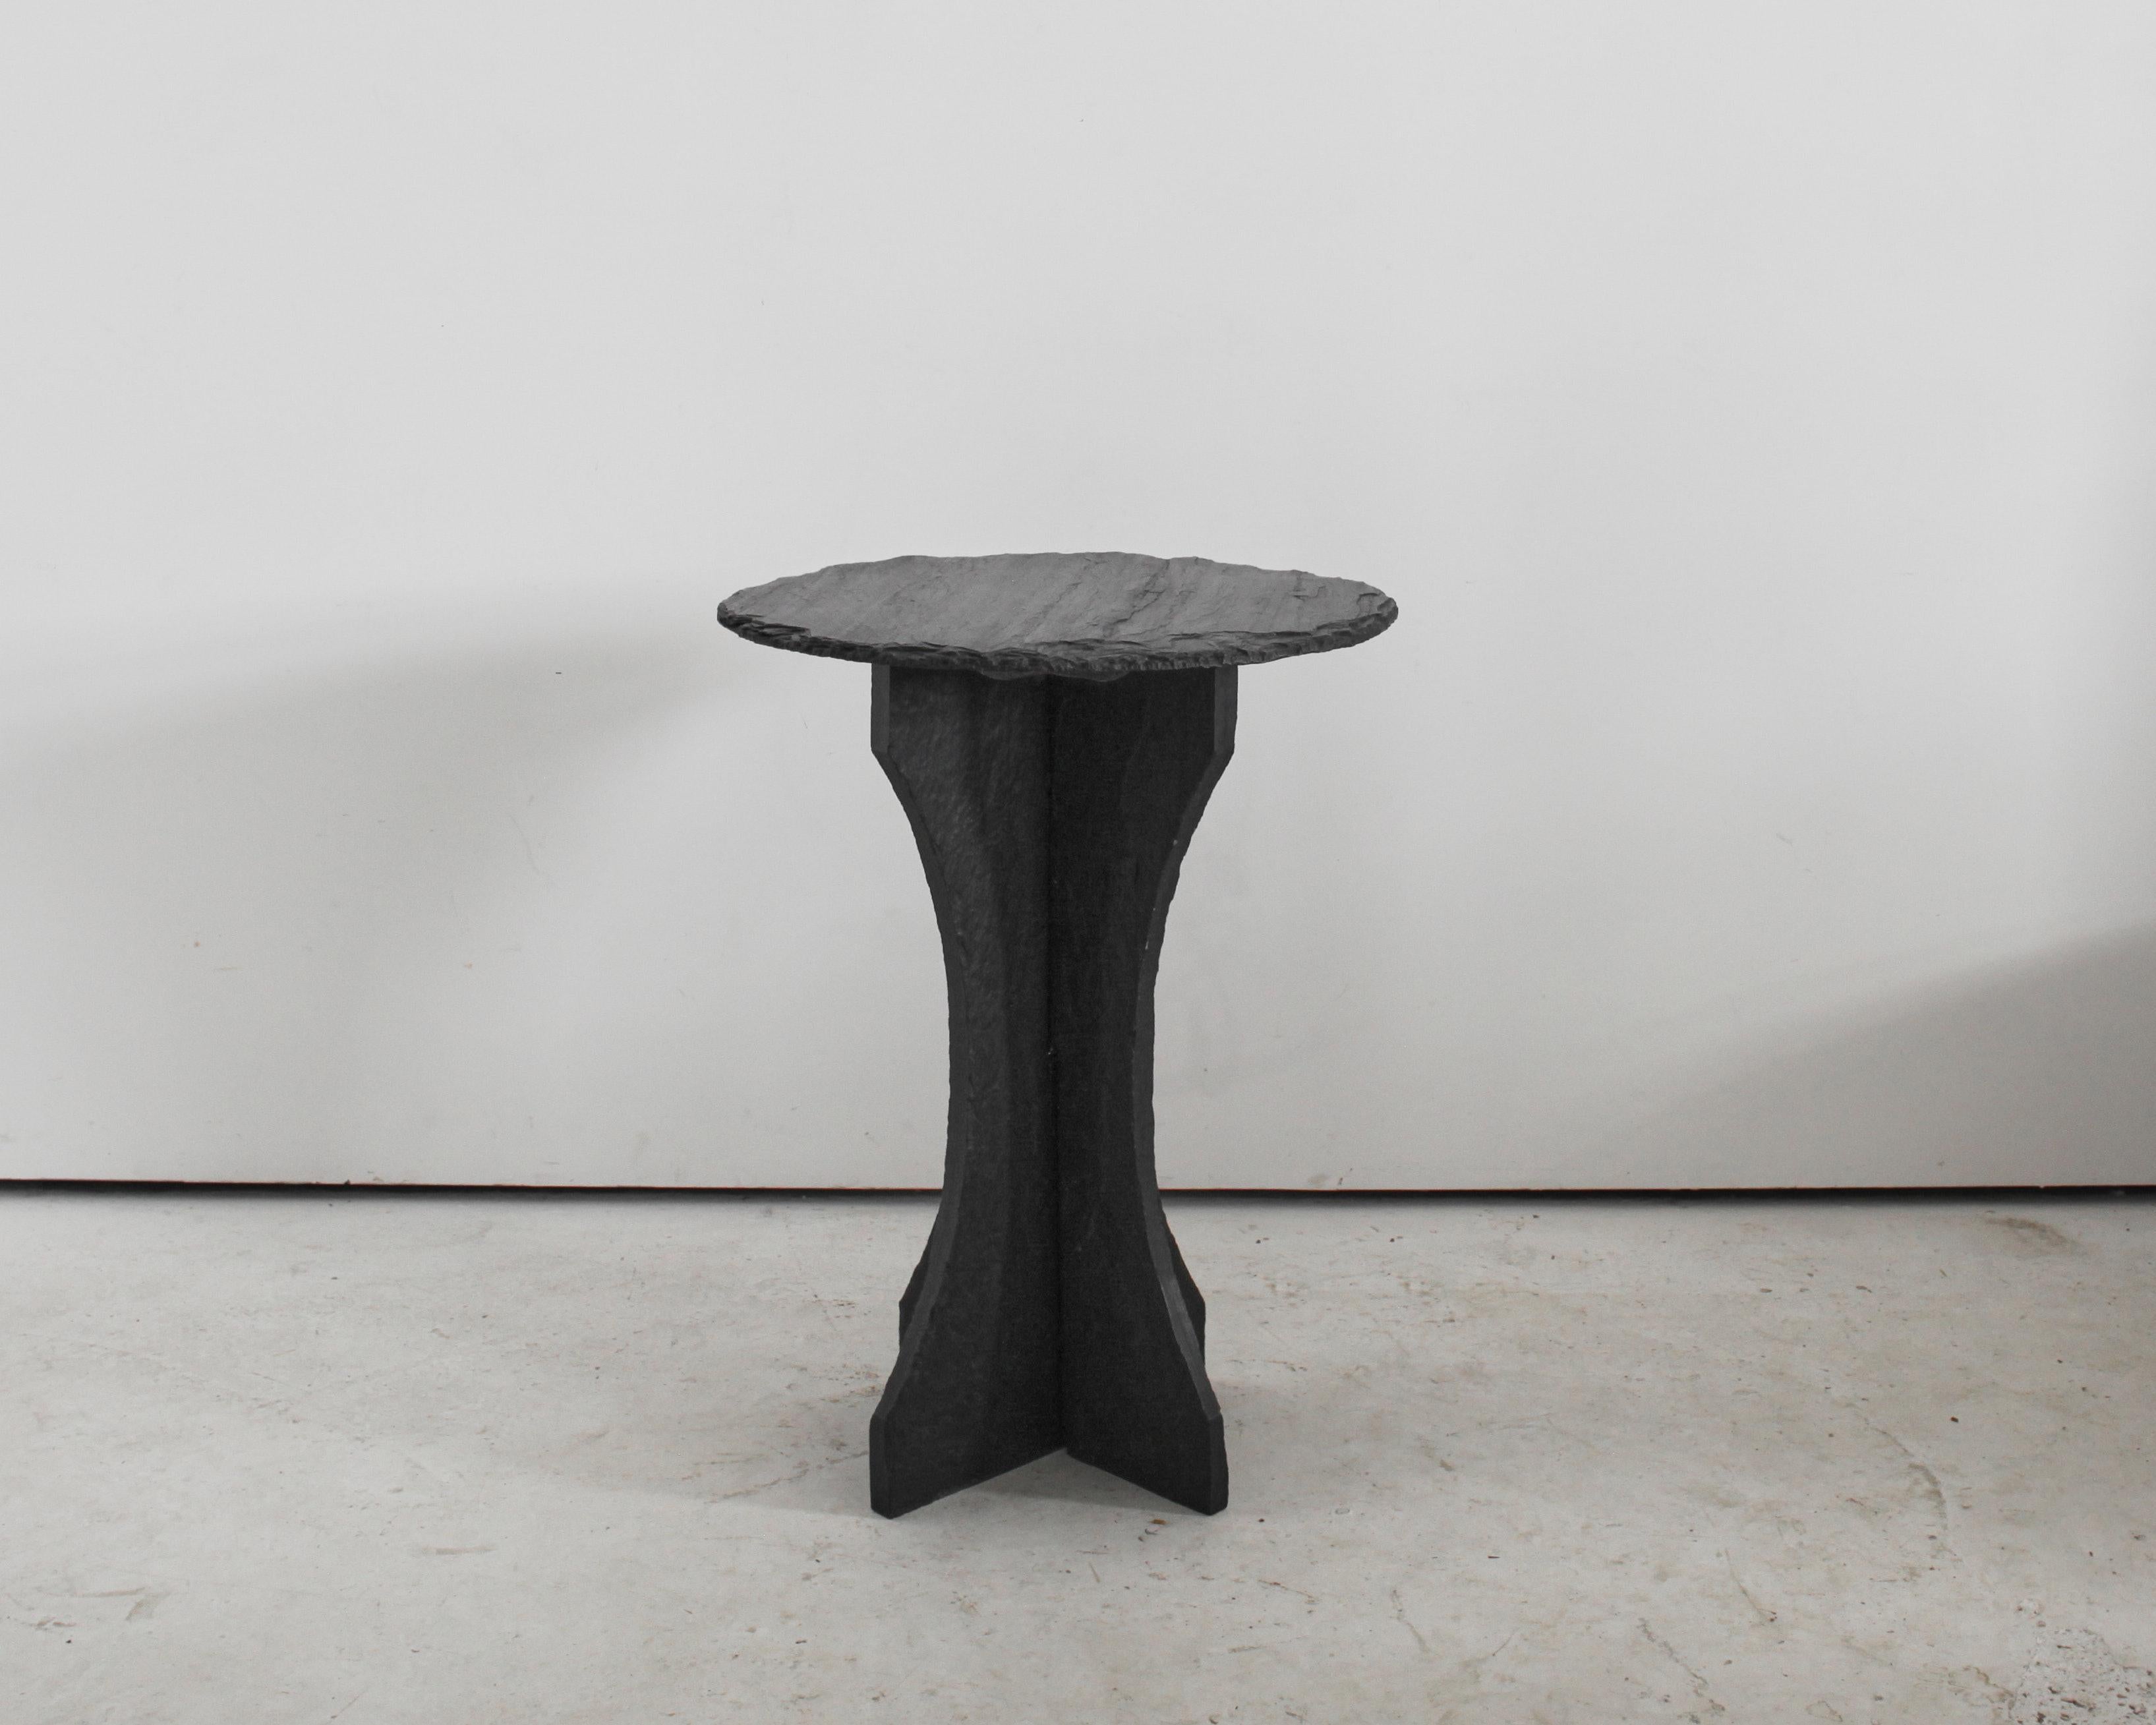 A C.1950s primitive riven slate occasional table/plinth from the Angers region of France.

Simple interlocking base. Able to be fully dismantled.